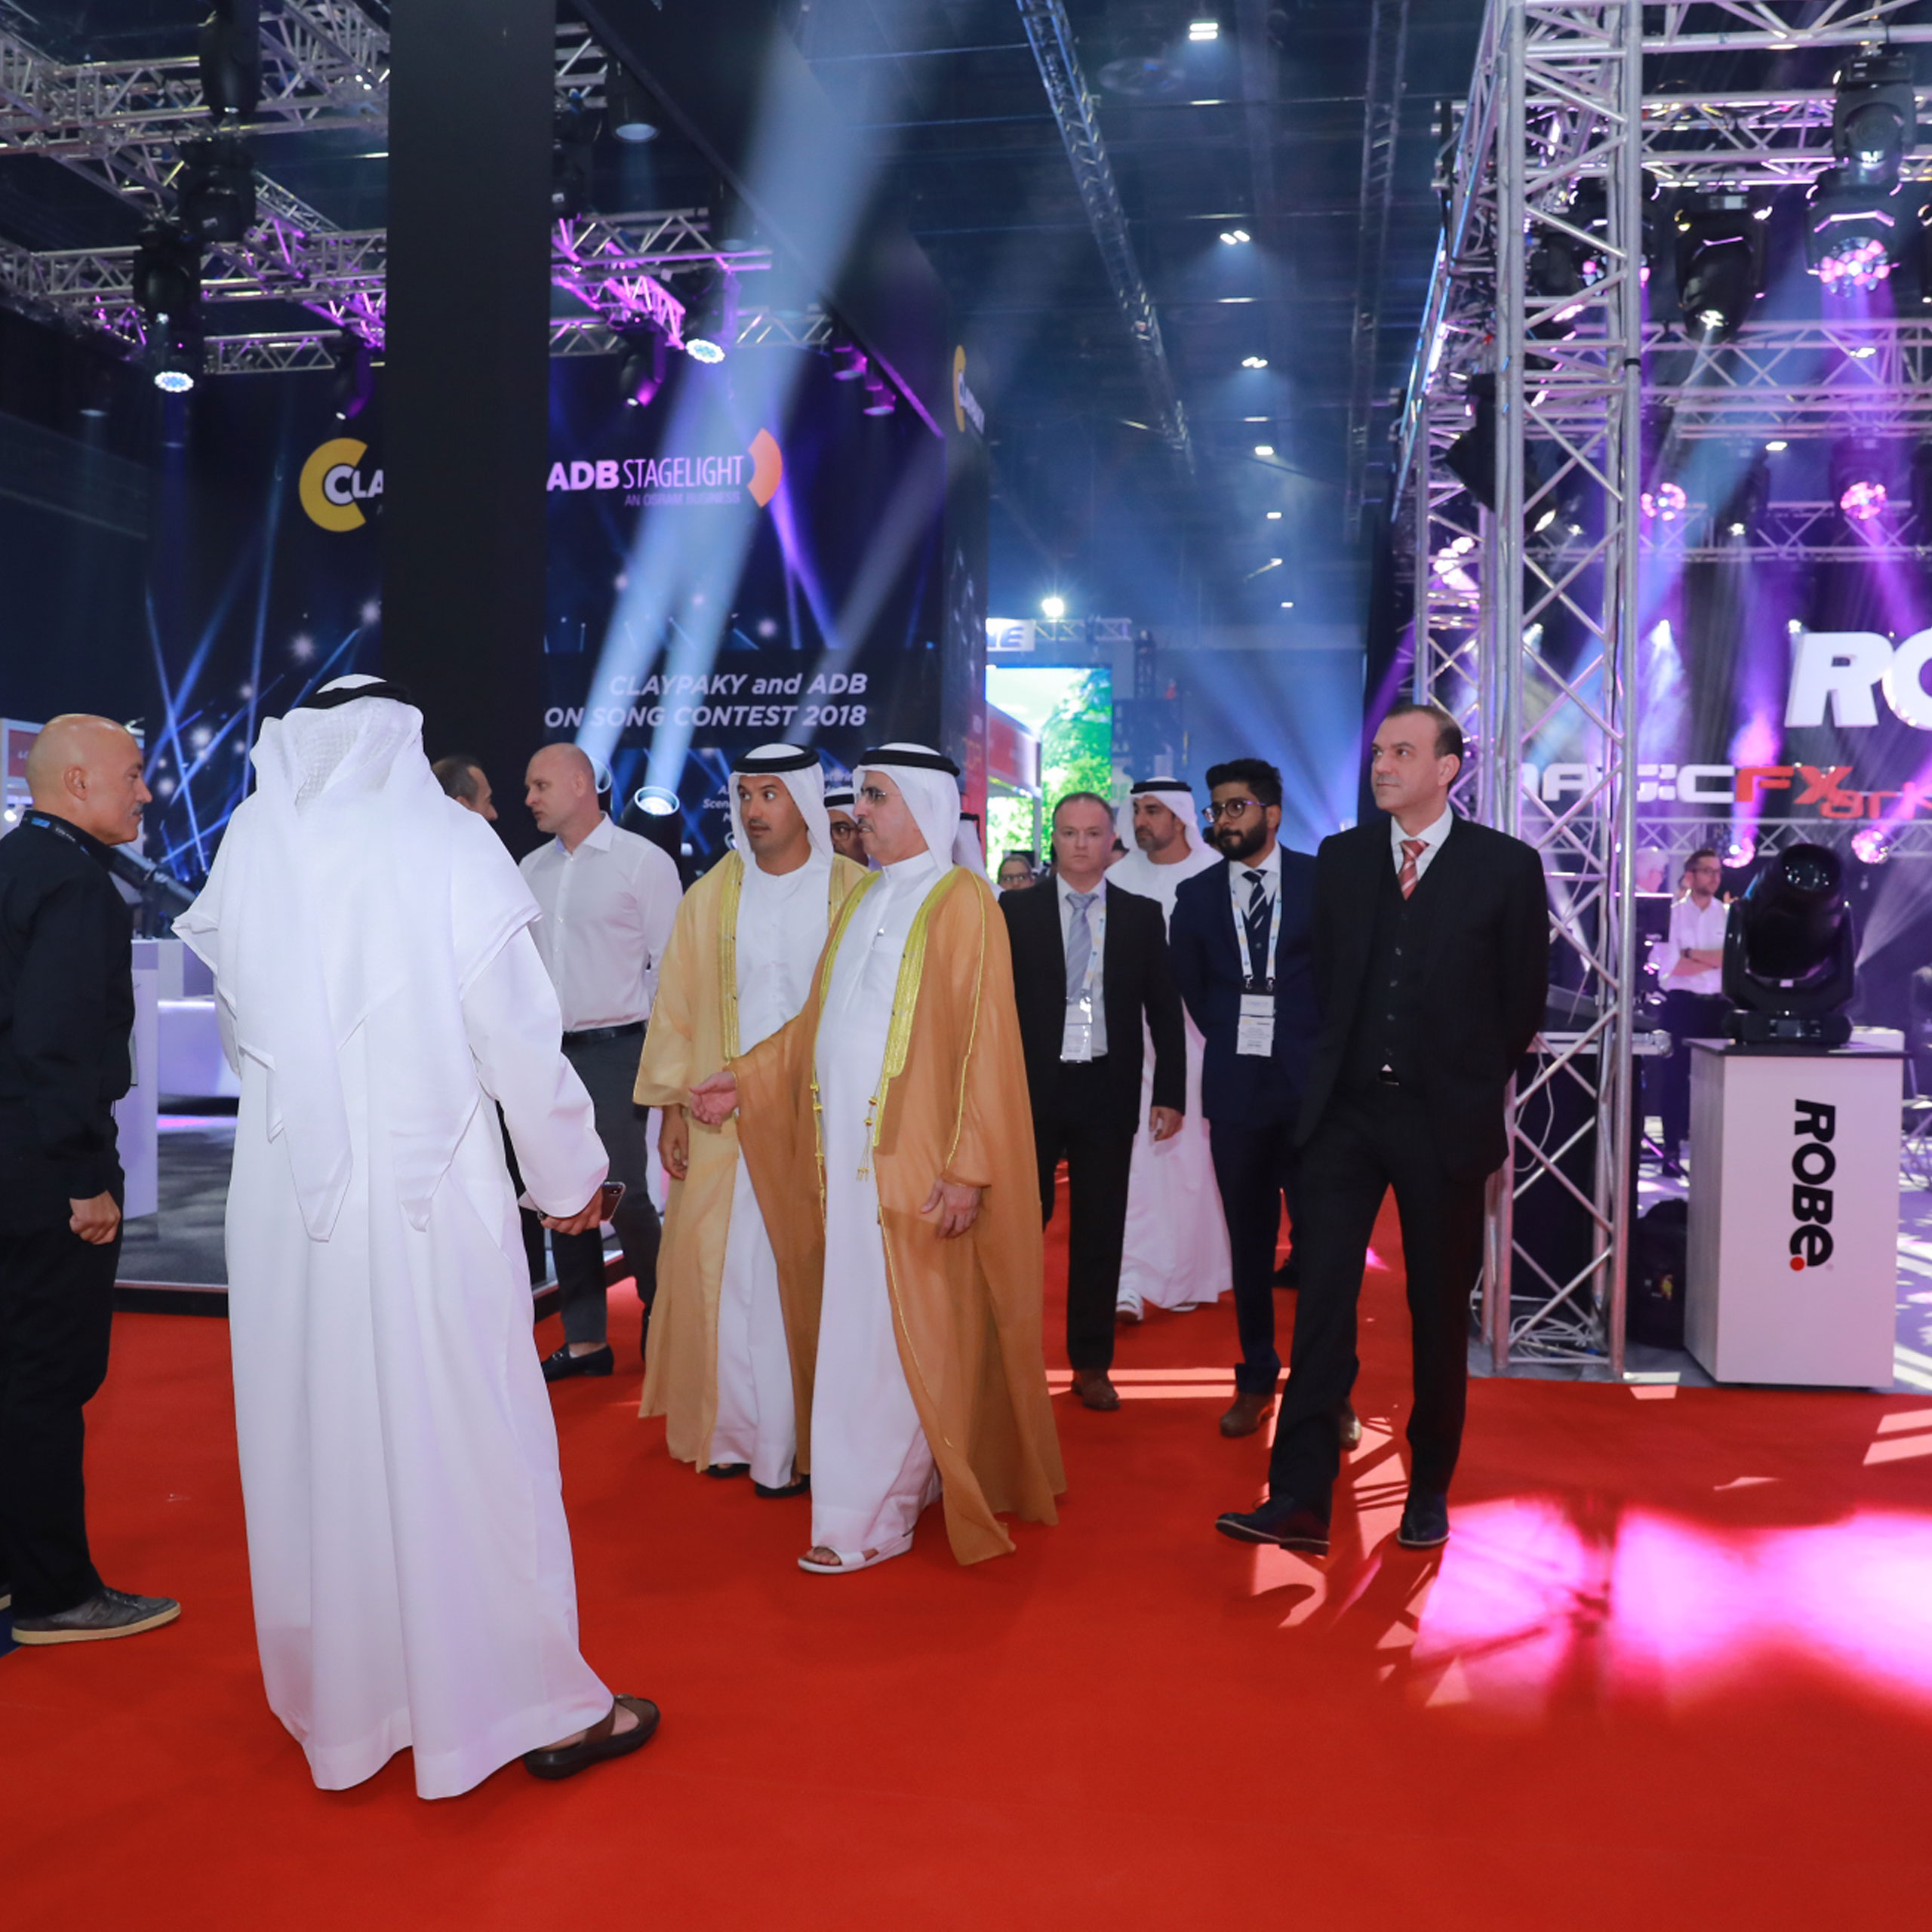 PLSME was opened by H.E. Saeed Mohammed Ahmed Al Tayer - Prolight + Sound Middle East